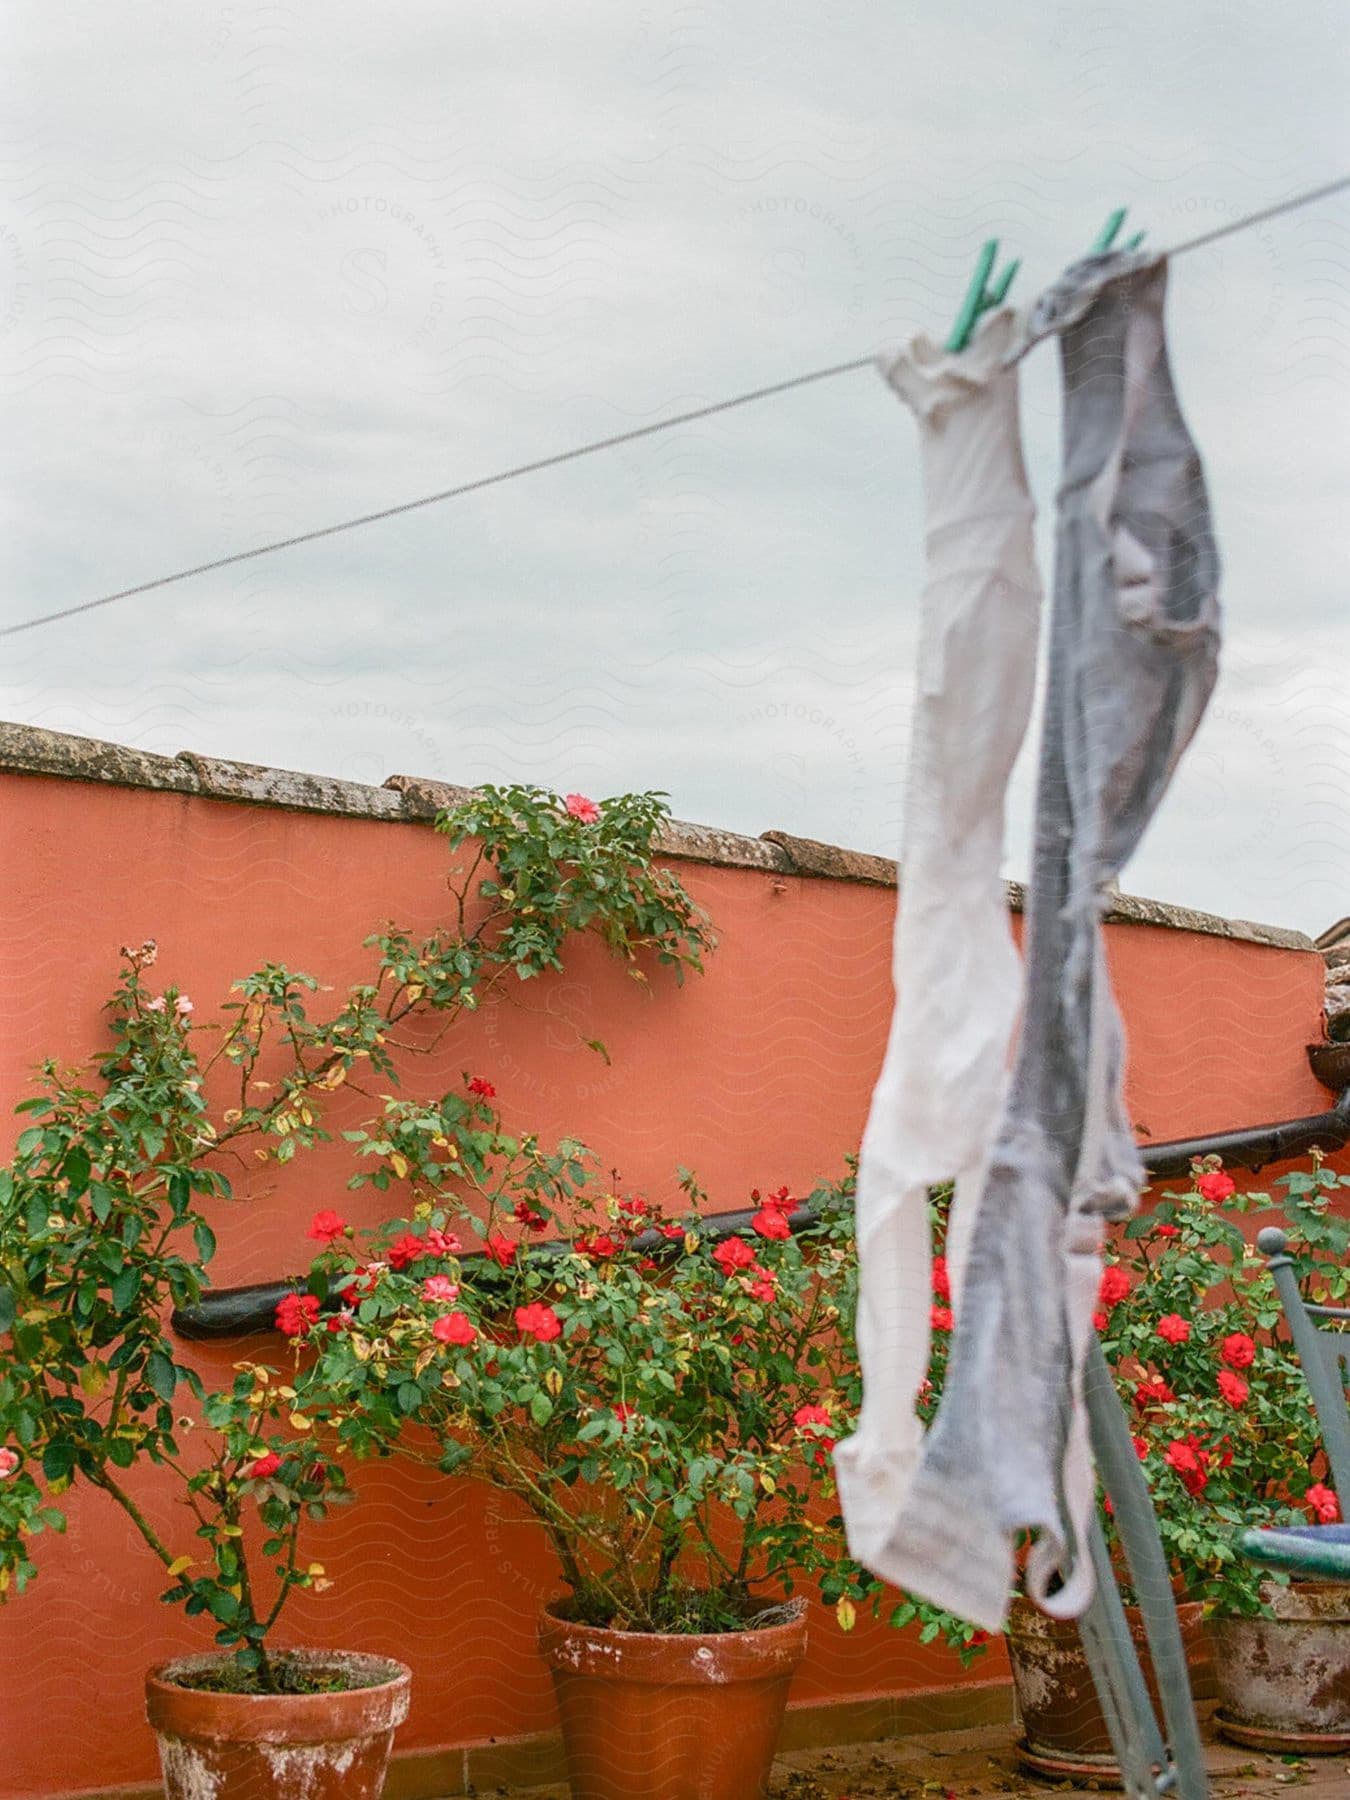 Jeans drying out under an overcast sky